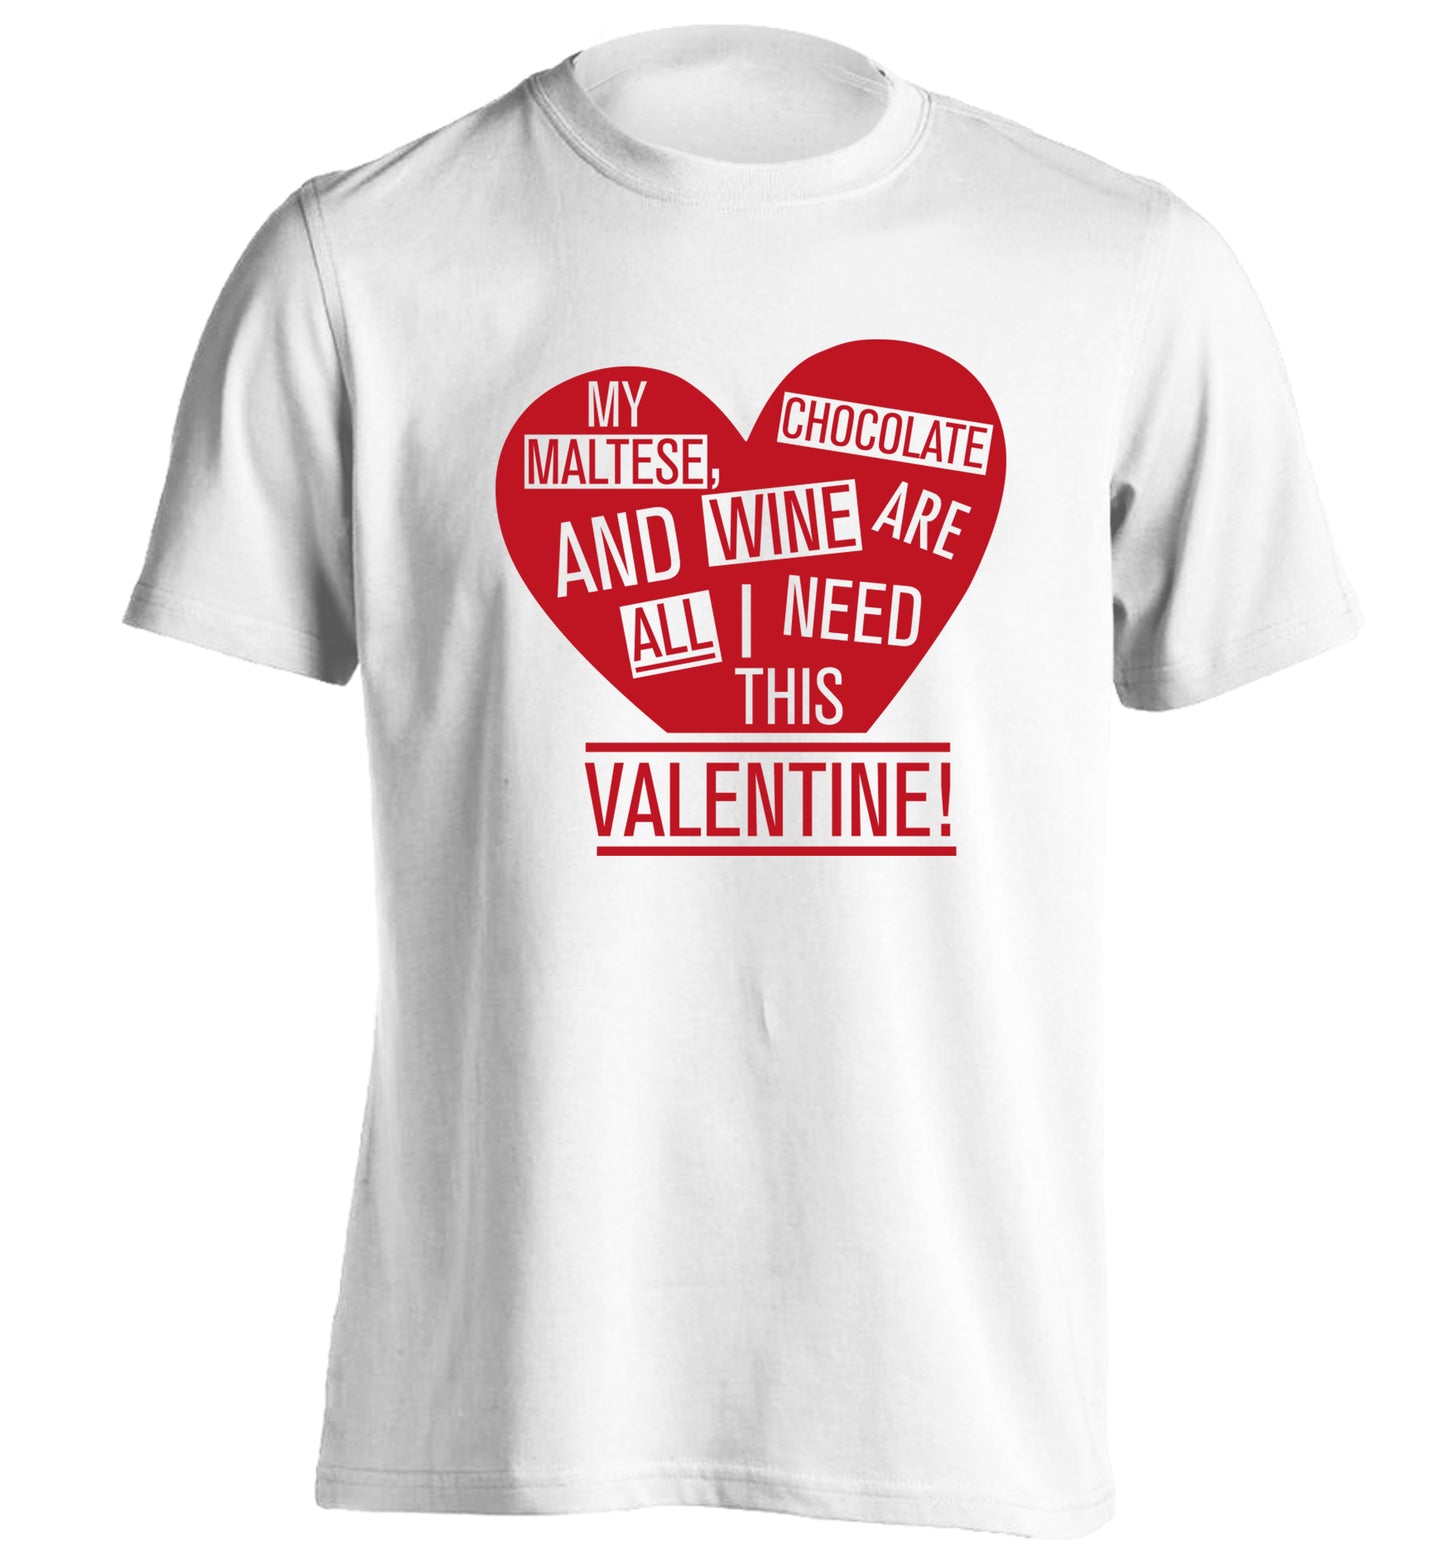 My maltese, chocolate and wine are all I need this valentine! adults unisex white Tshirt 2XL